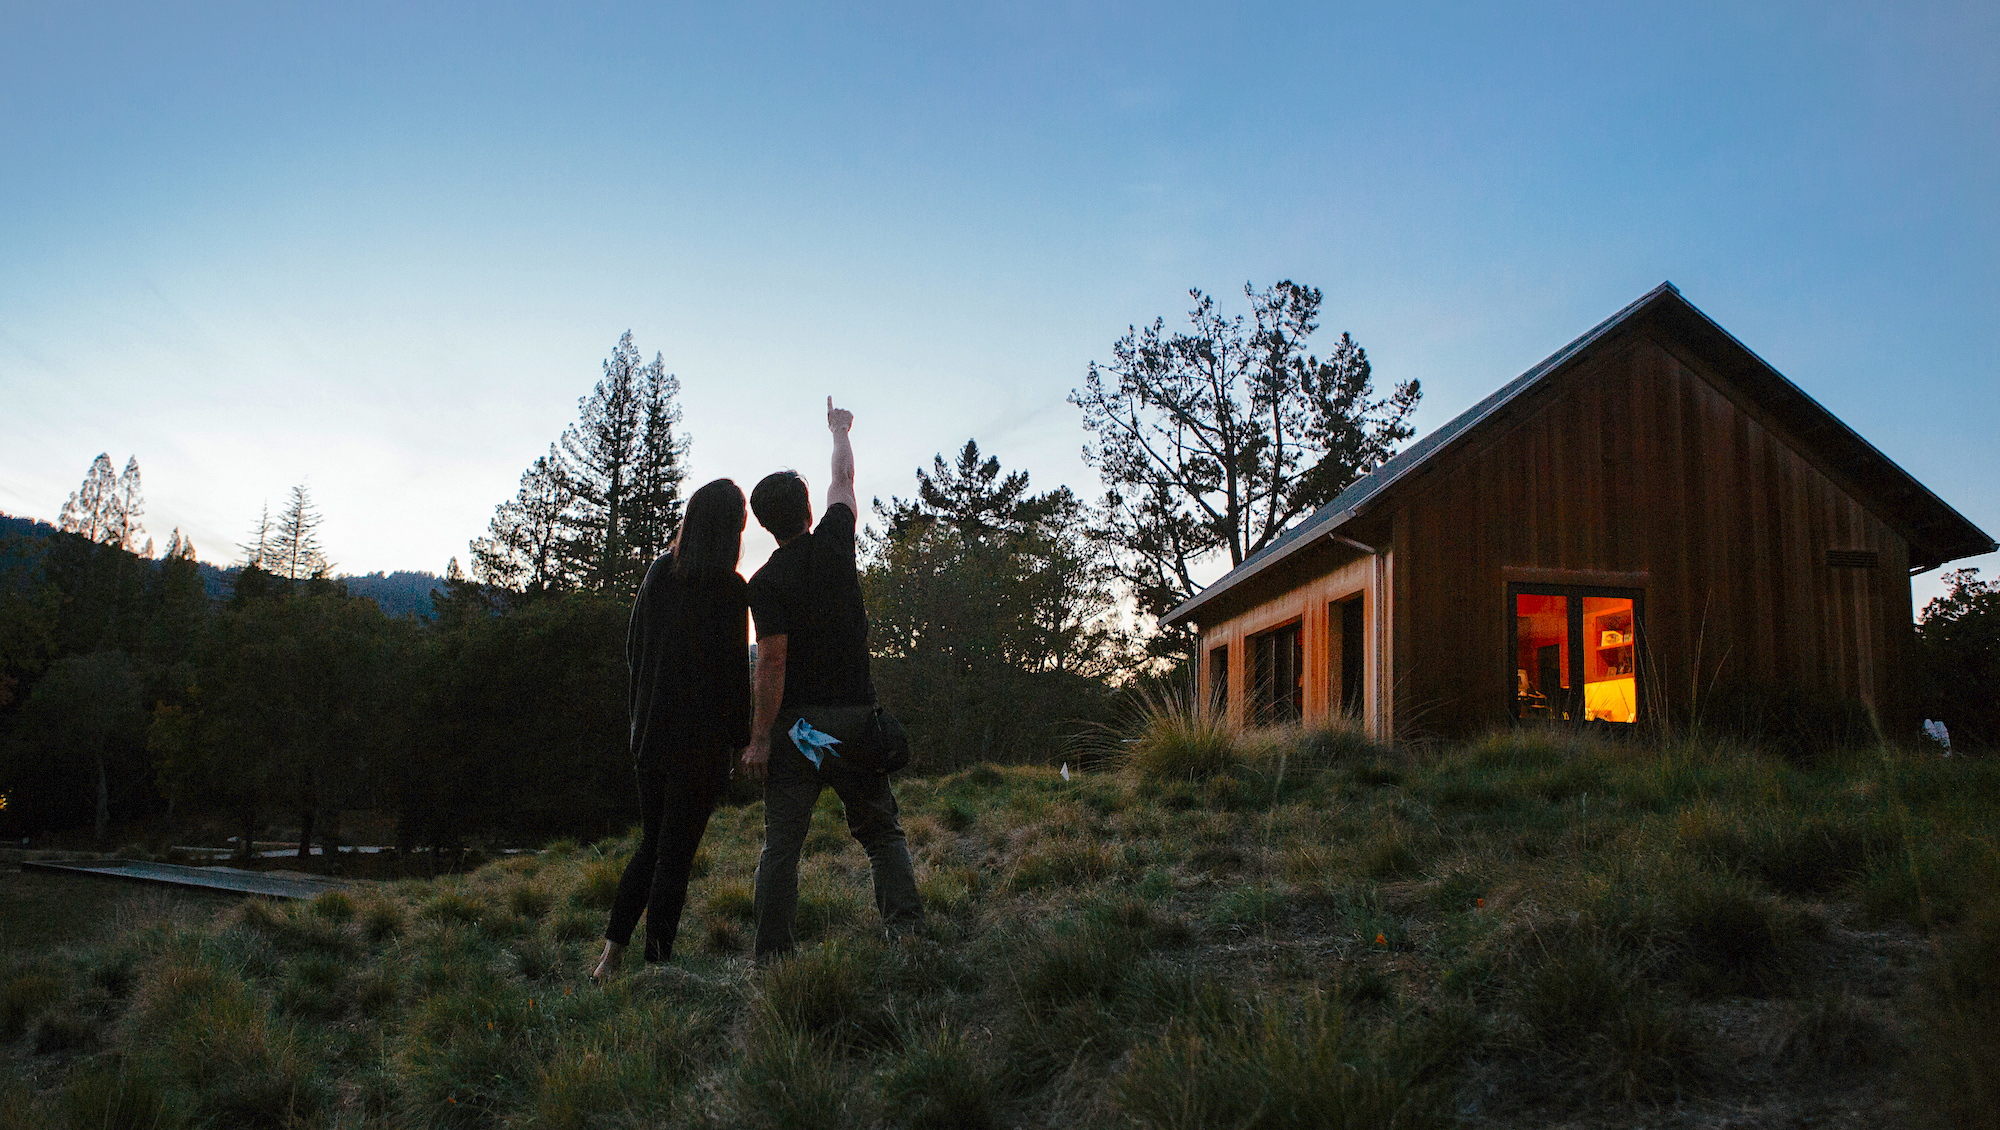 Two people outside of a log cabin, facing away from the camera and pointing towards the sky at dusk